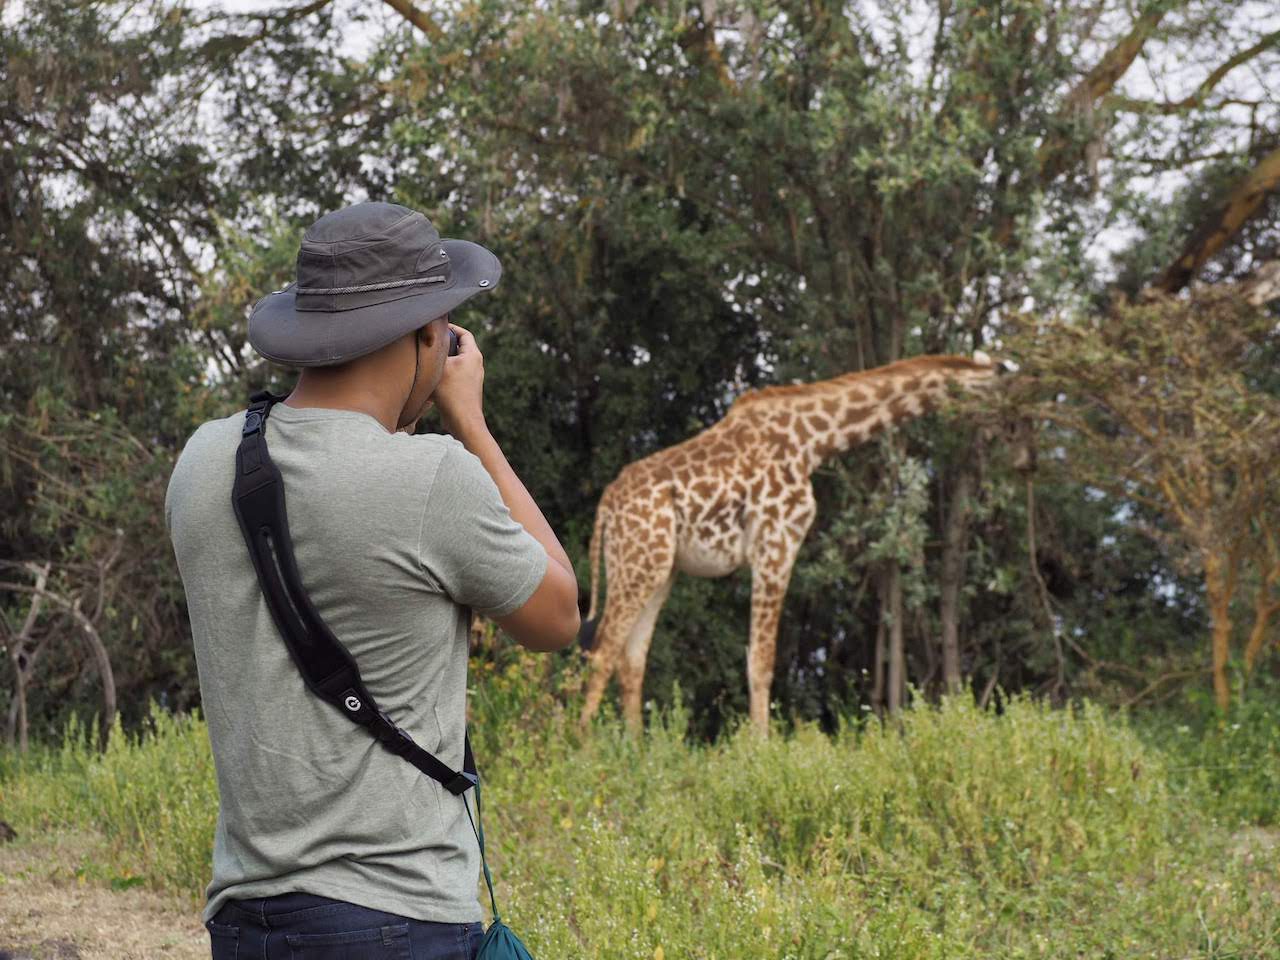 One traveller photographs a giraffe in the distance on Crescent Island.